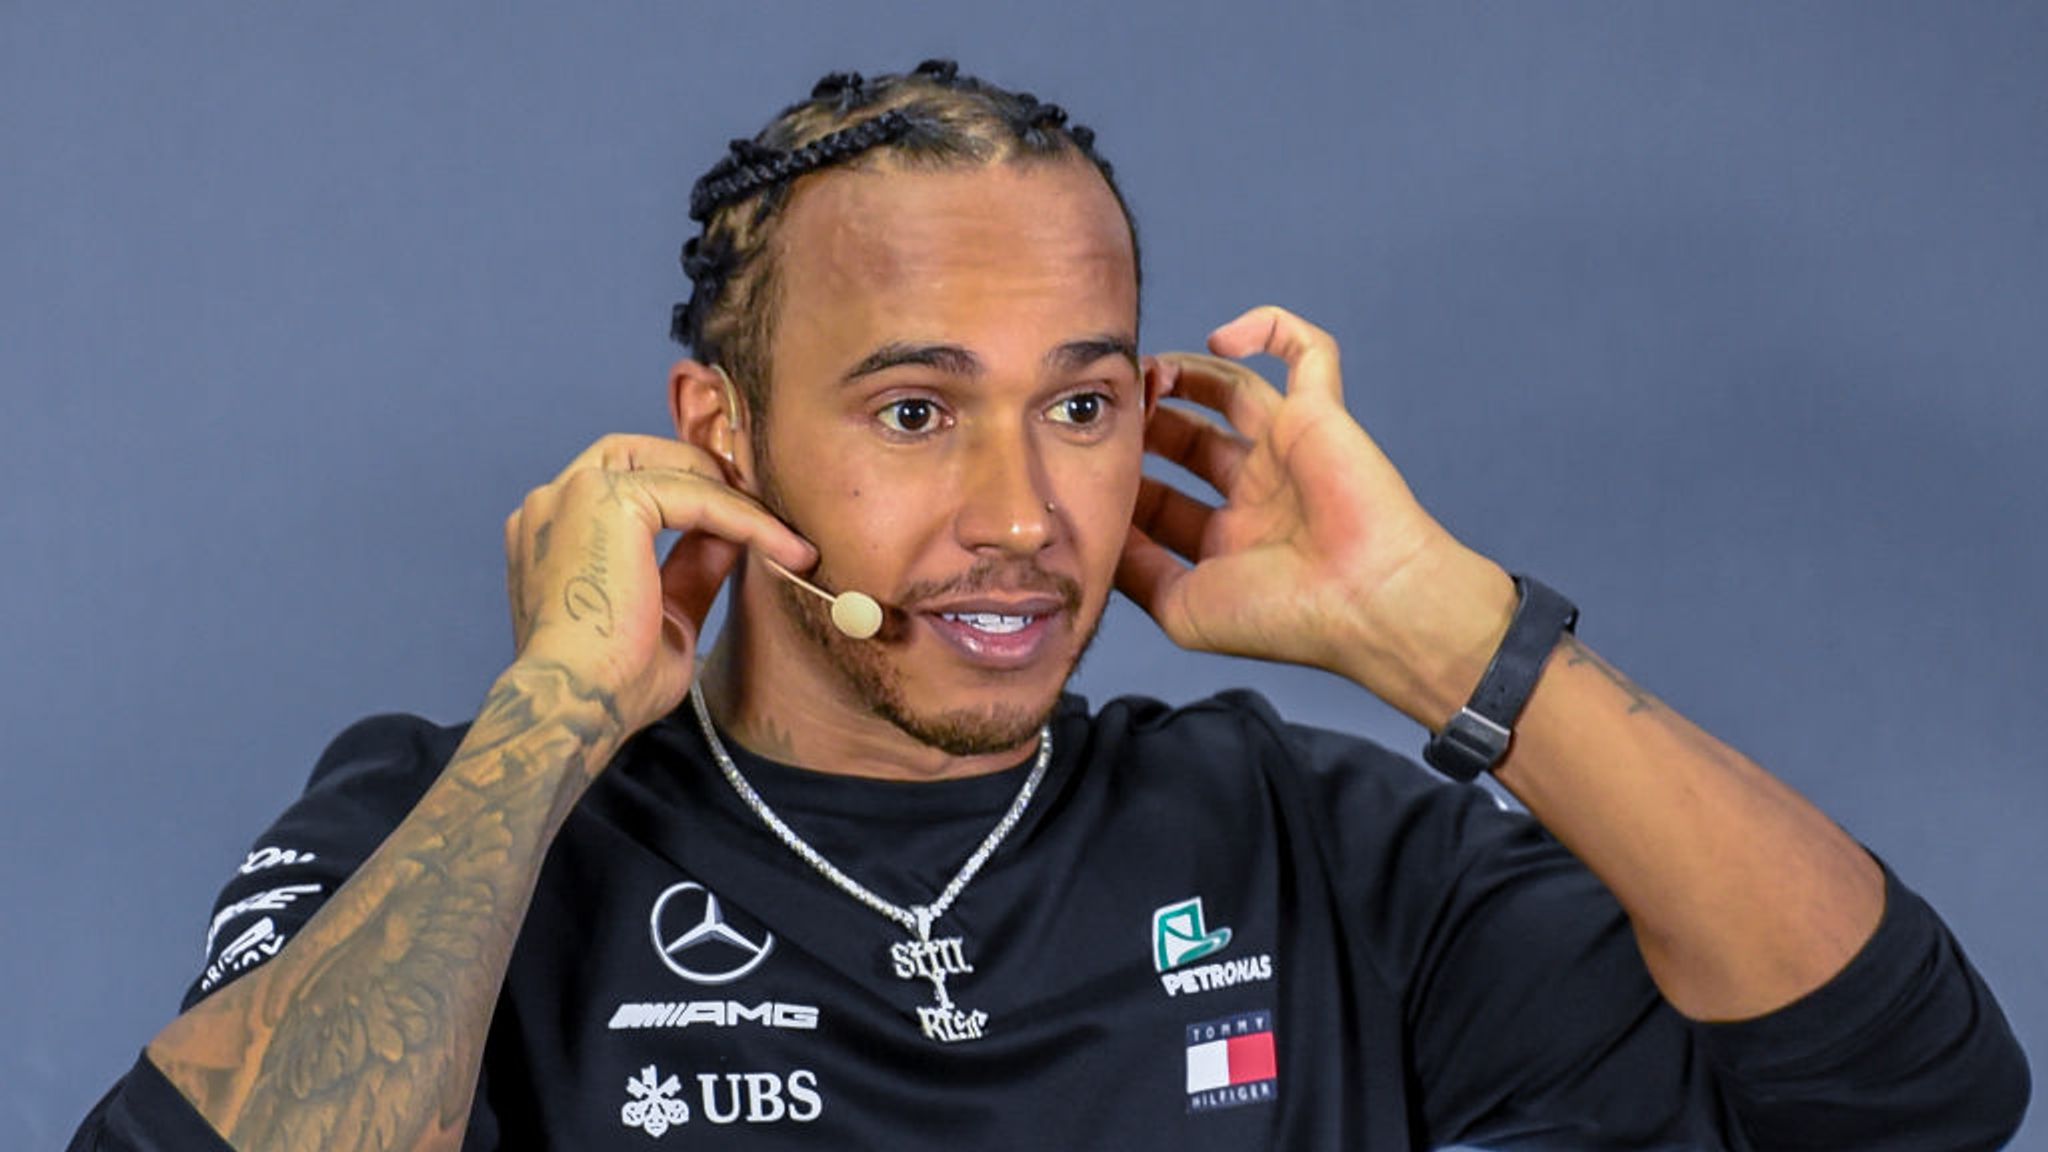 How the world reacted to Lewis Hamilton's sixth world championship